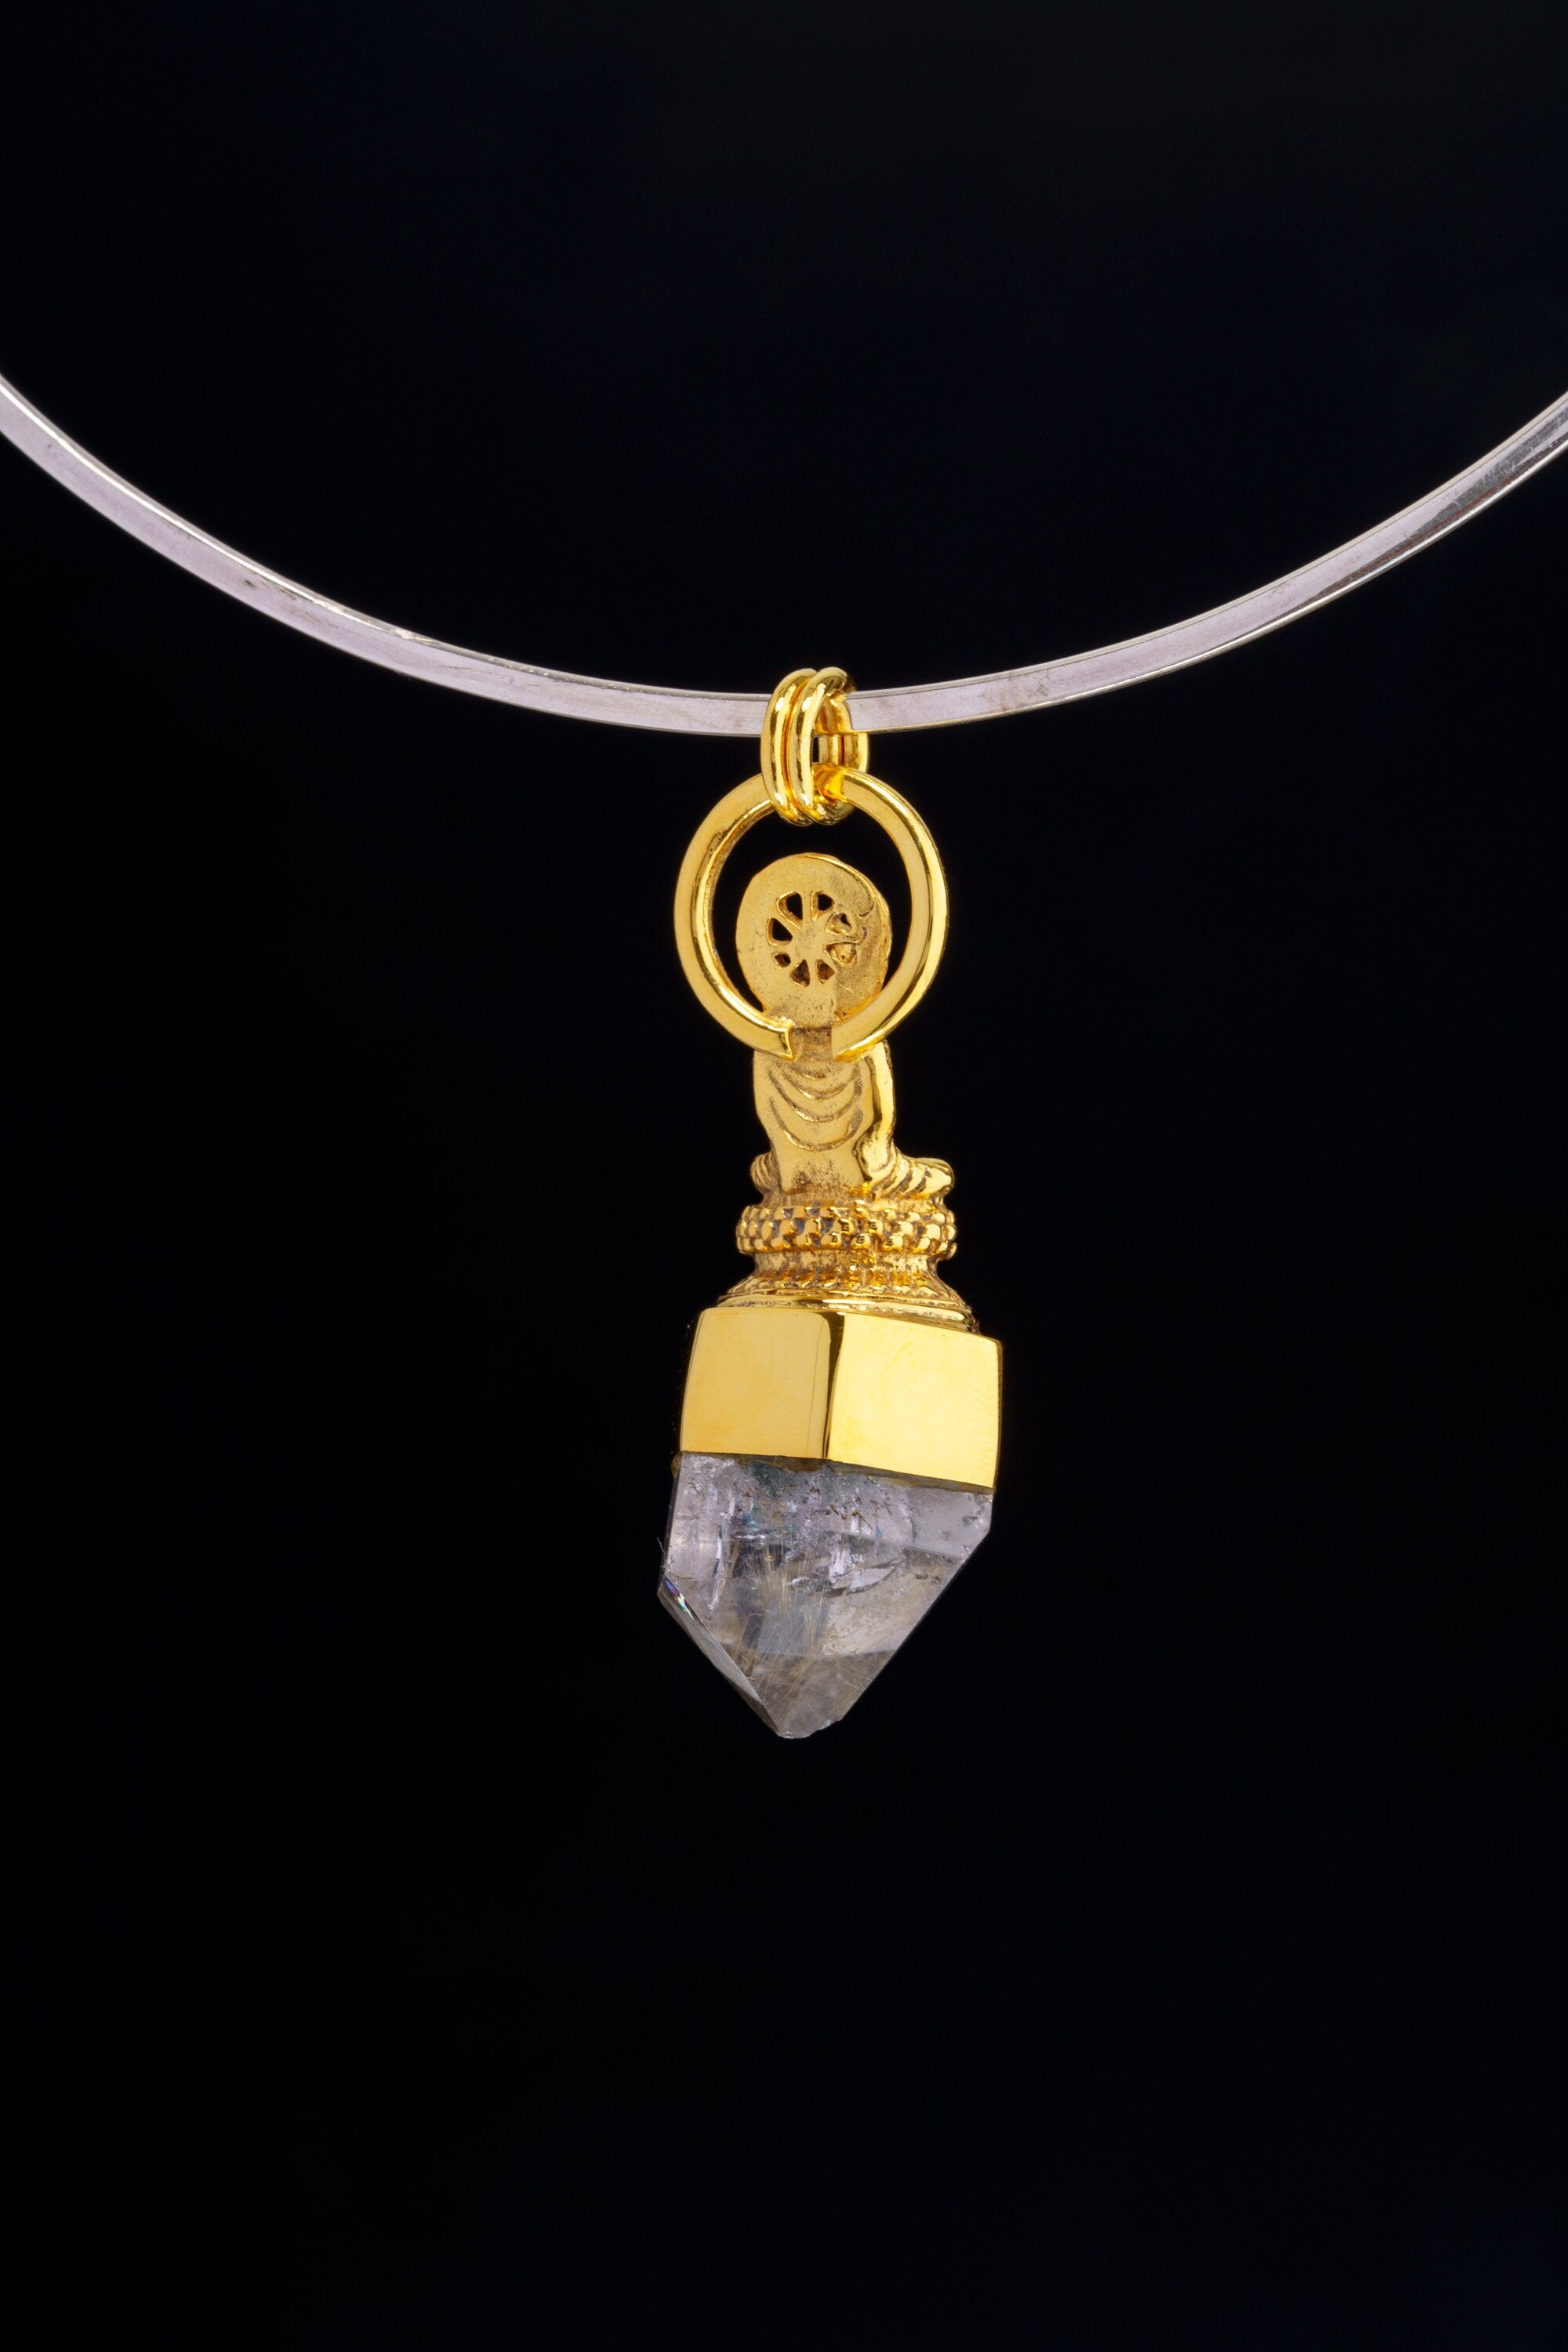 Eclipsing Serenity: The Praying Budha with a Cut Inclusion Golden Rutile Quartz - Gold Plated Sterling Silver Talisman Pendant